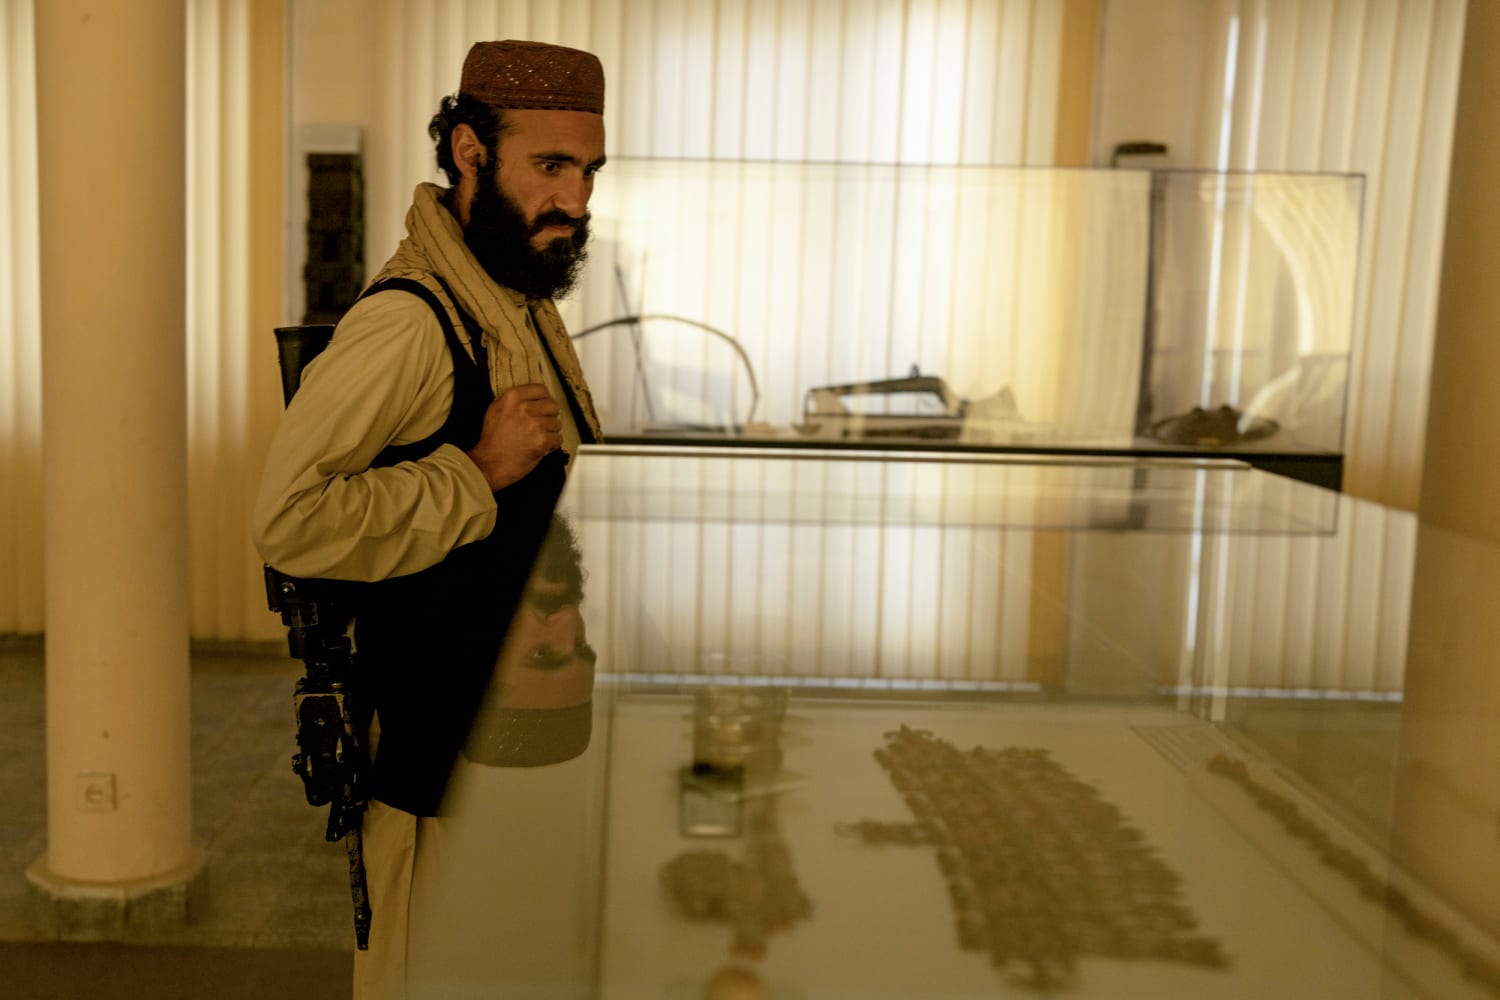 The Taliban once ransacked Afghanistan’s national museum. Now they protect it.